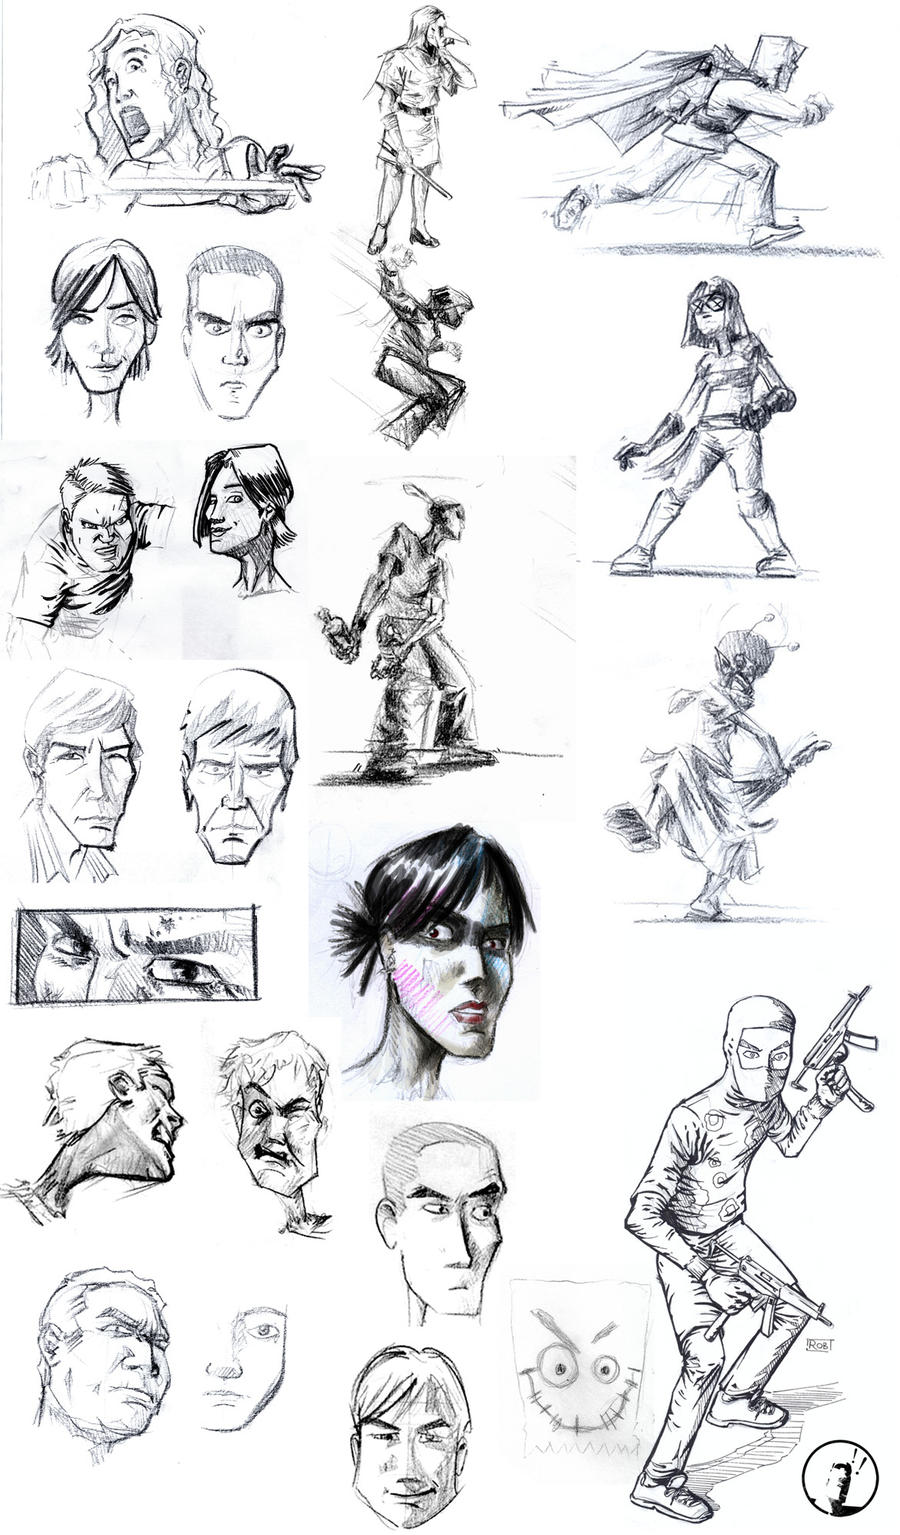 Comic - Character Designs 01 by ISignRob on DeviantArt